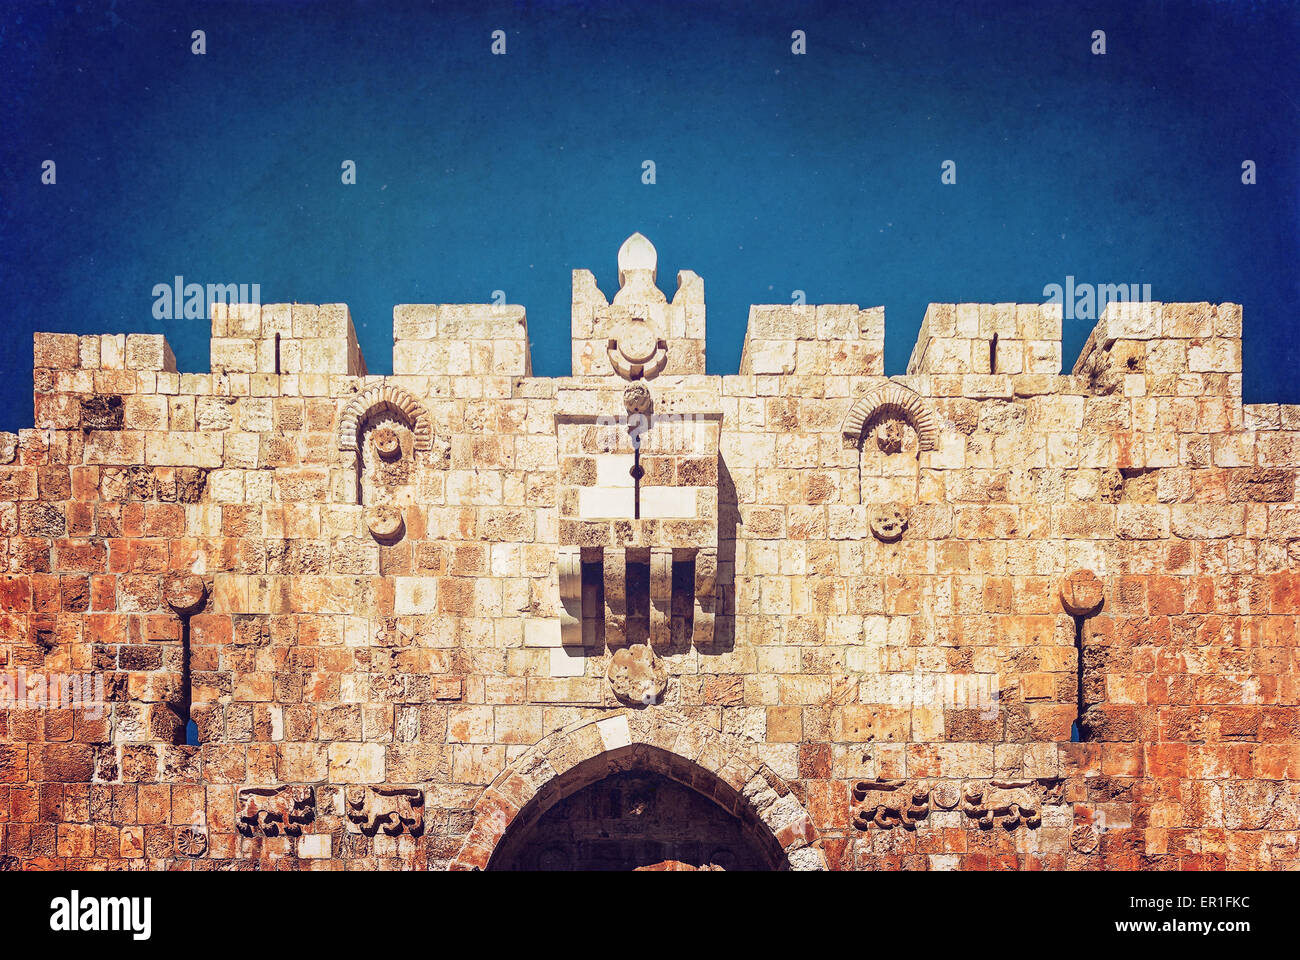 Lion Gate of the ancient wall surrounding the Old City of Jerusalem Stock Photo